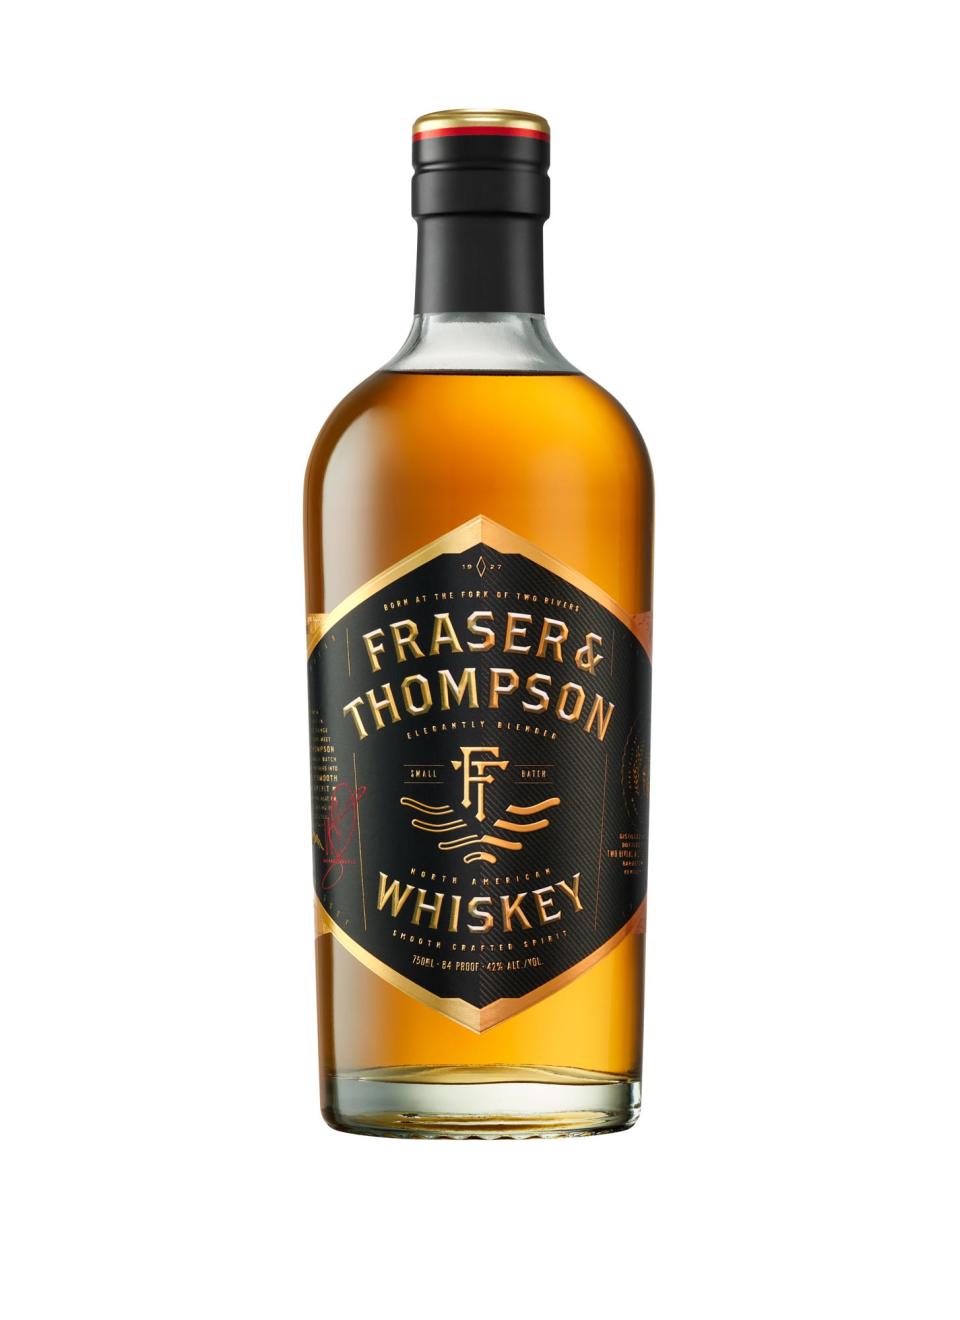 Fraser & Thompson North American Whiskey, founded by singer Michael Bublé and Master Distiller and Blender Paul Cirka, is available in limited
quantities in the U.S. and select international markets, including Canada, for $29.99, as well as on ReserveBar.